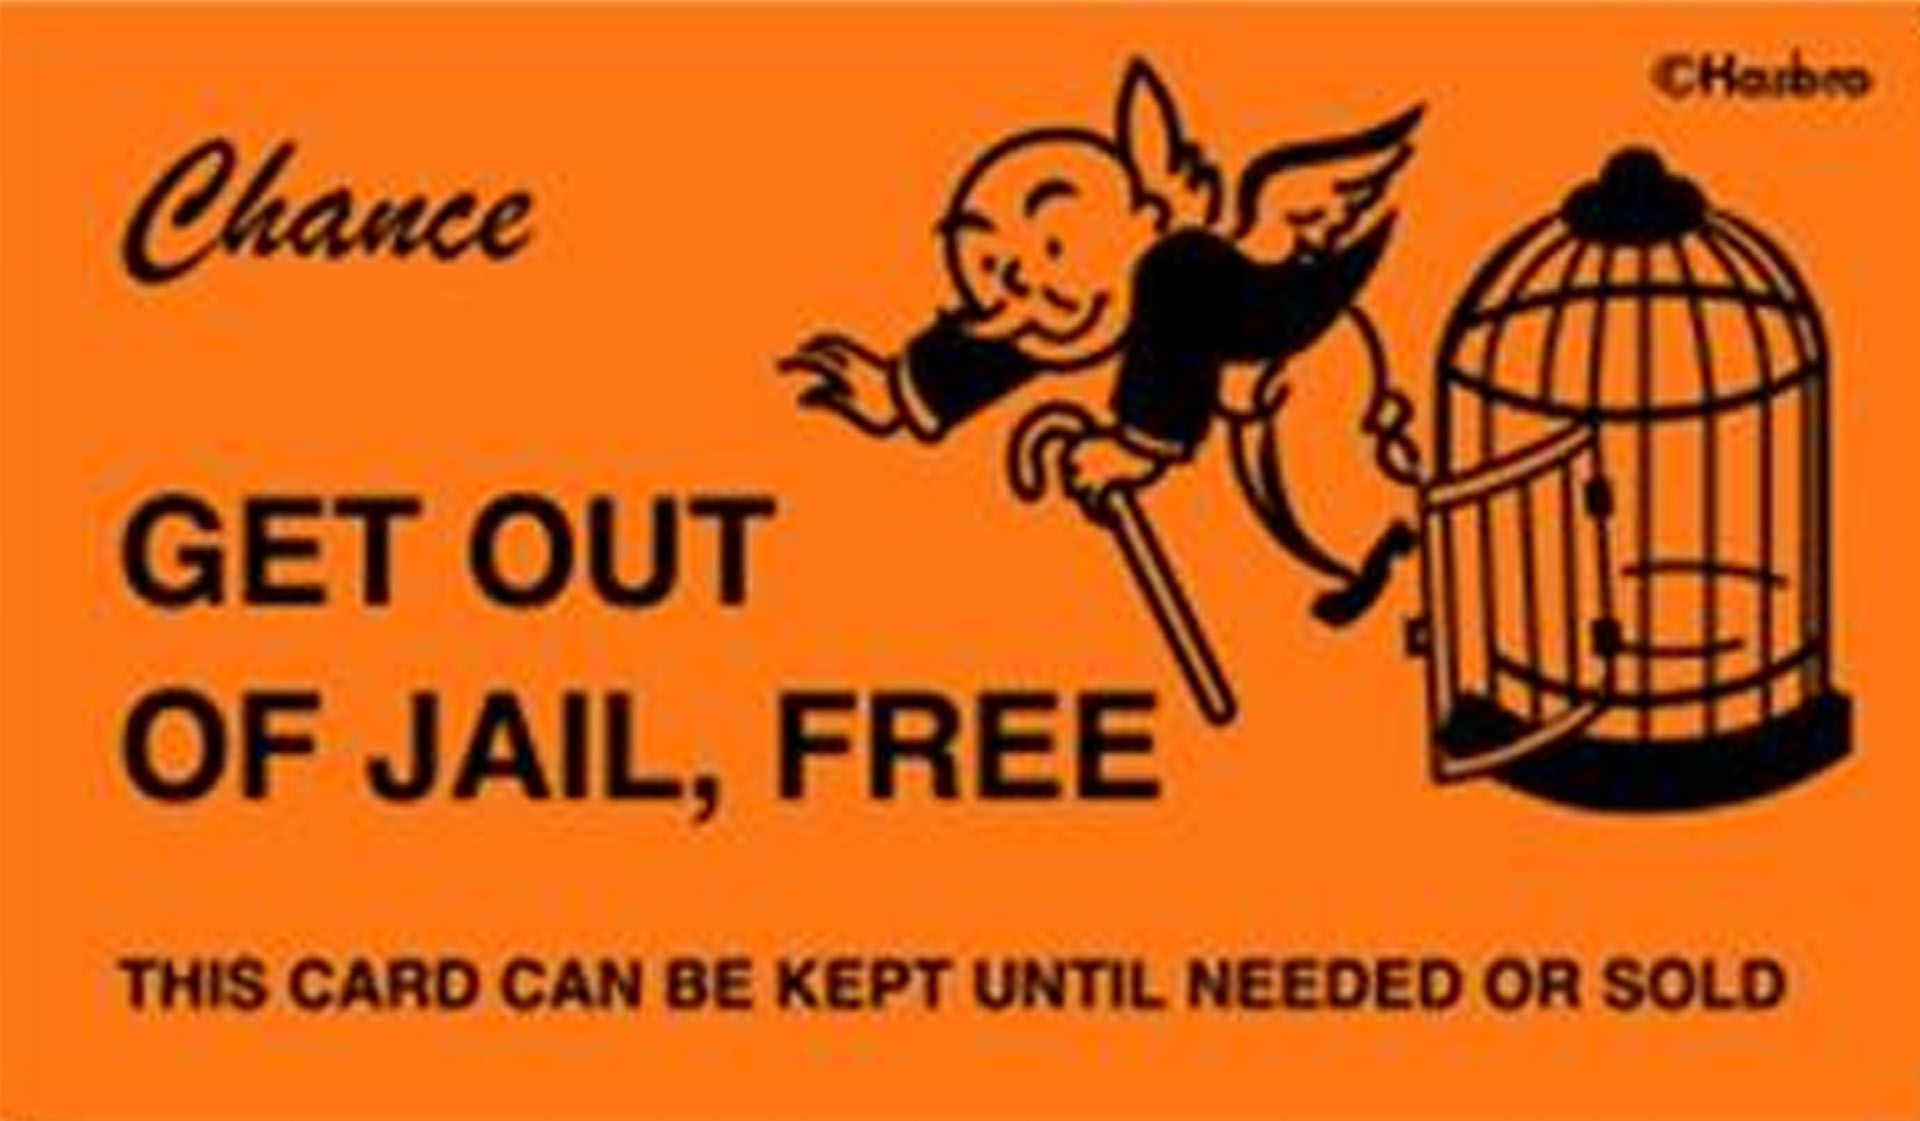 Polk sheriff 'accepts' Get Out of Jail Free cards